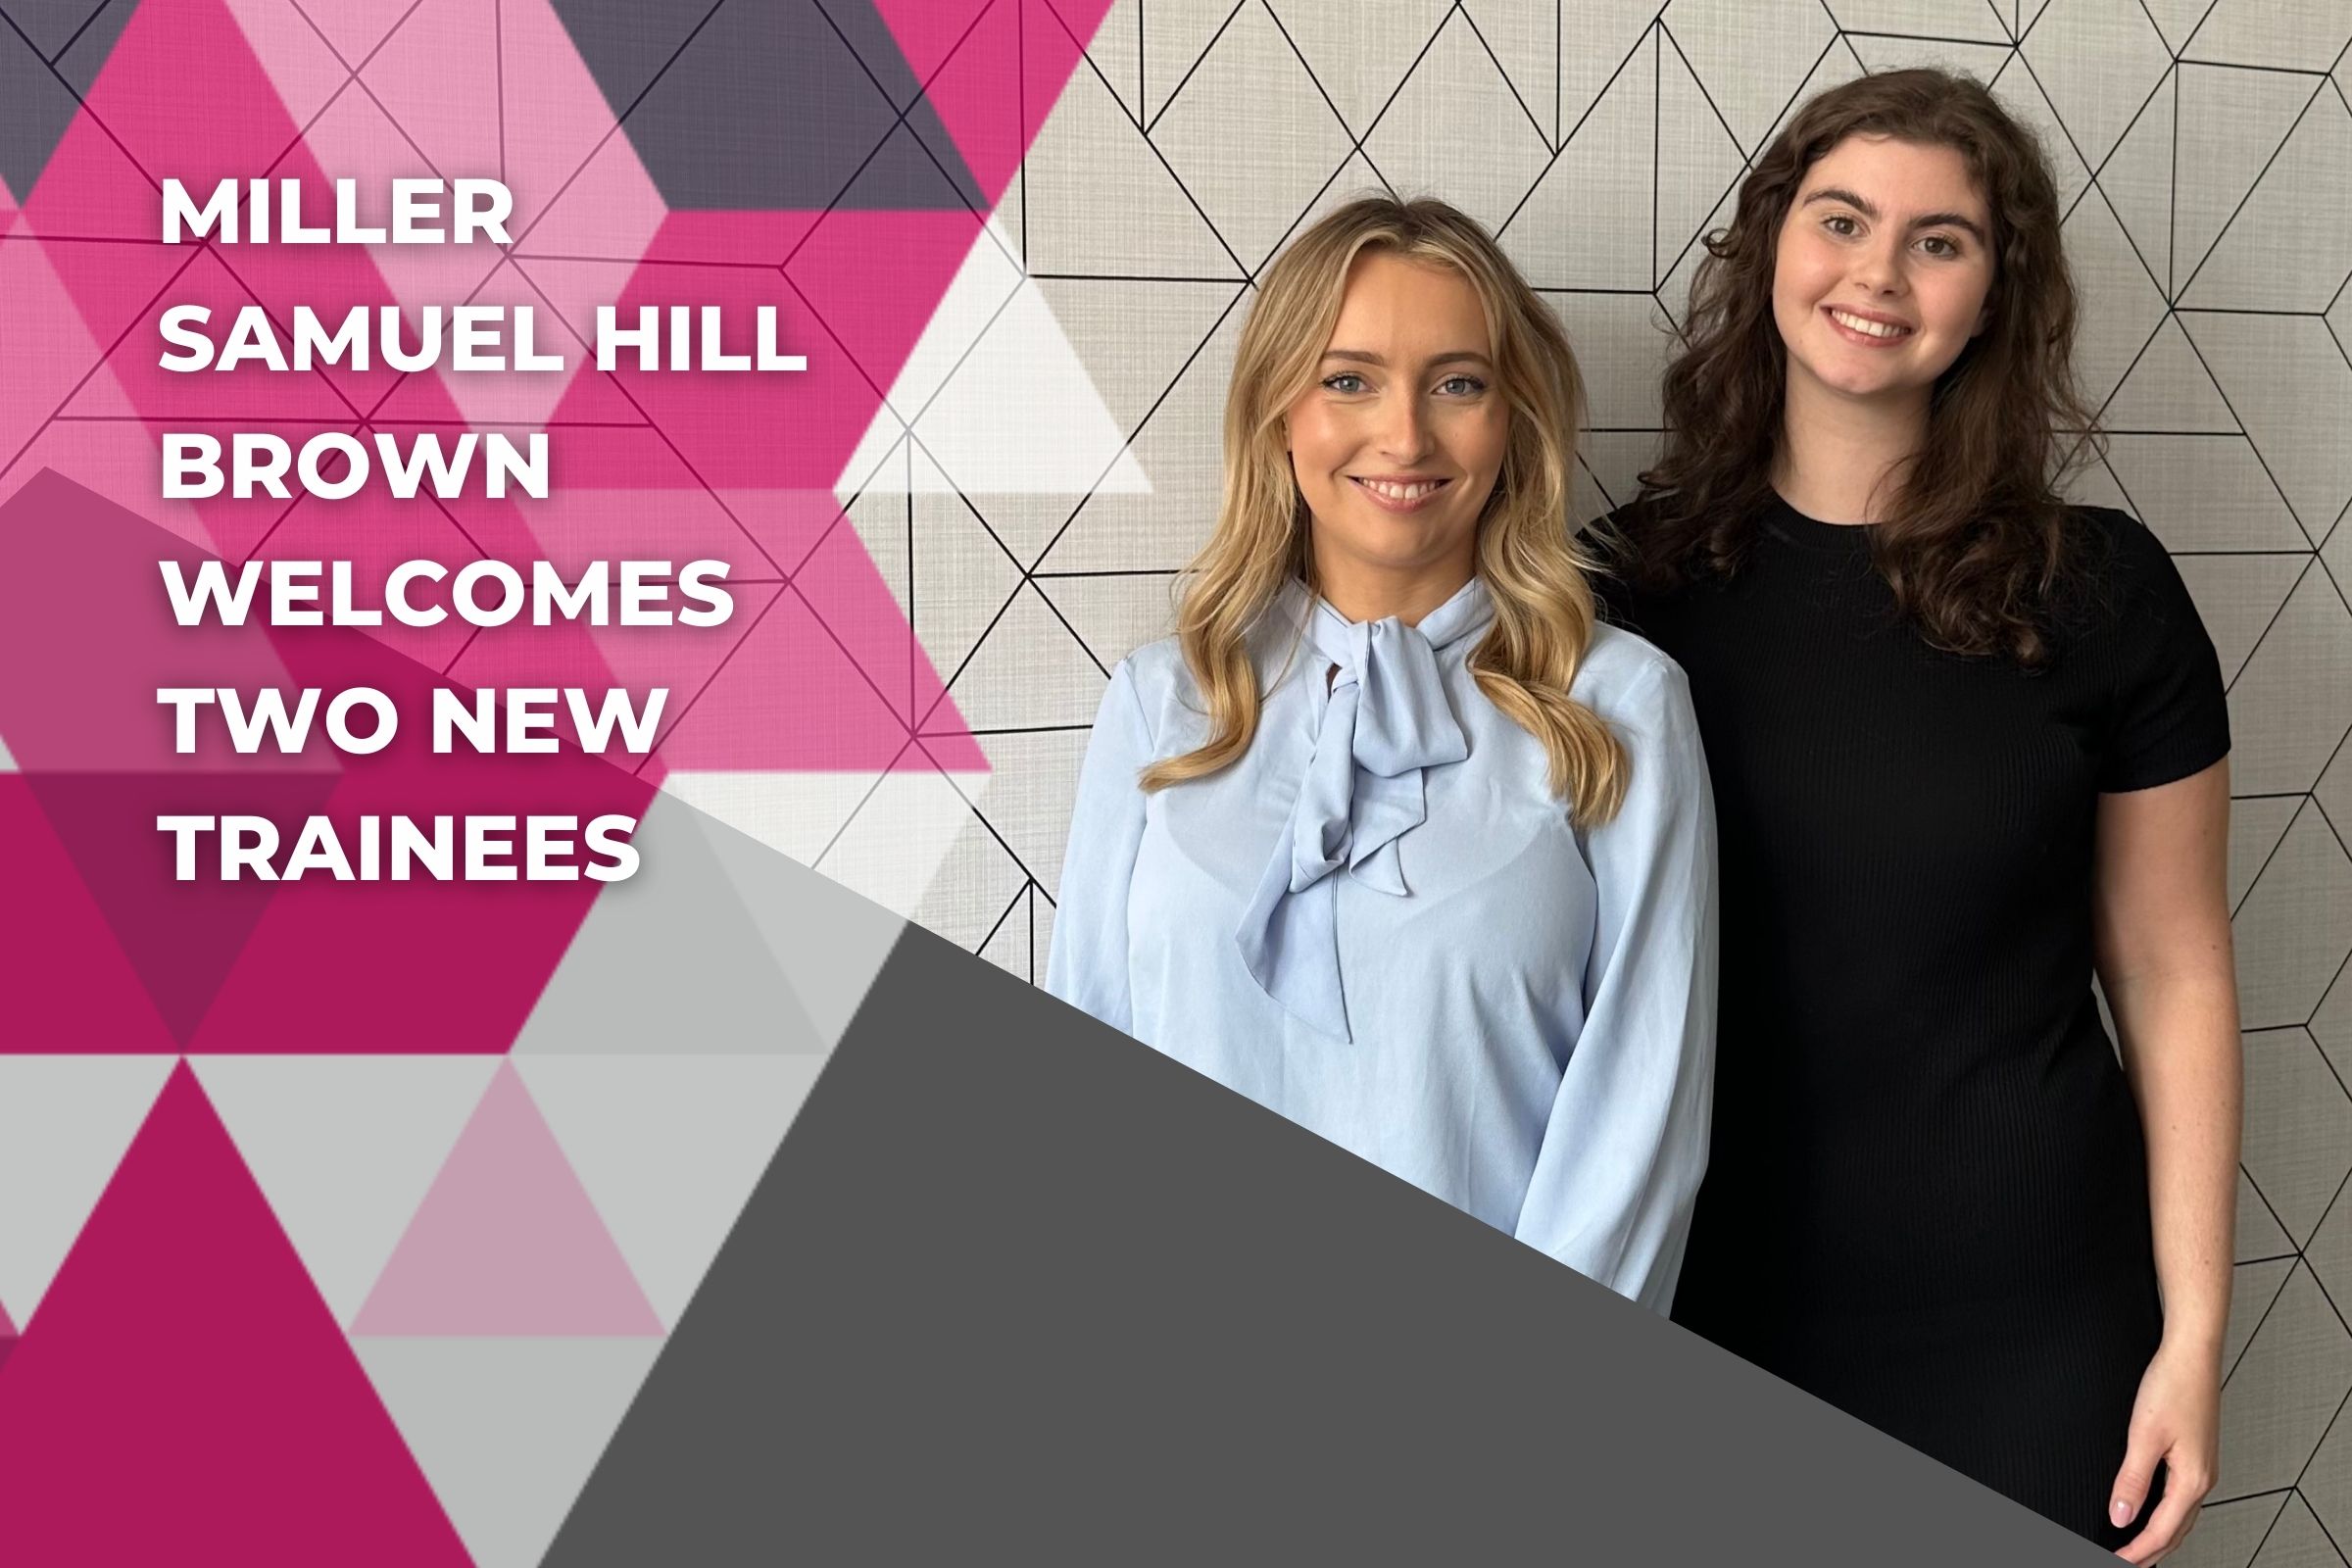 Miller Samuel Hill Brown Welcomes Two New Trainees